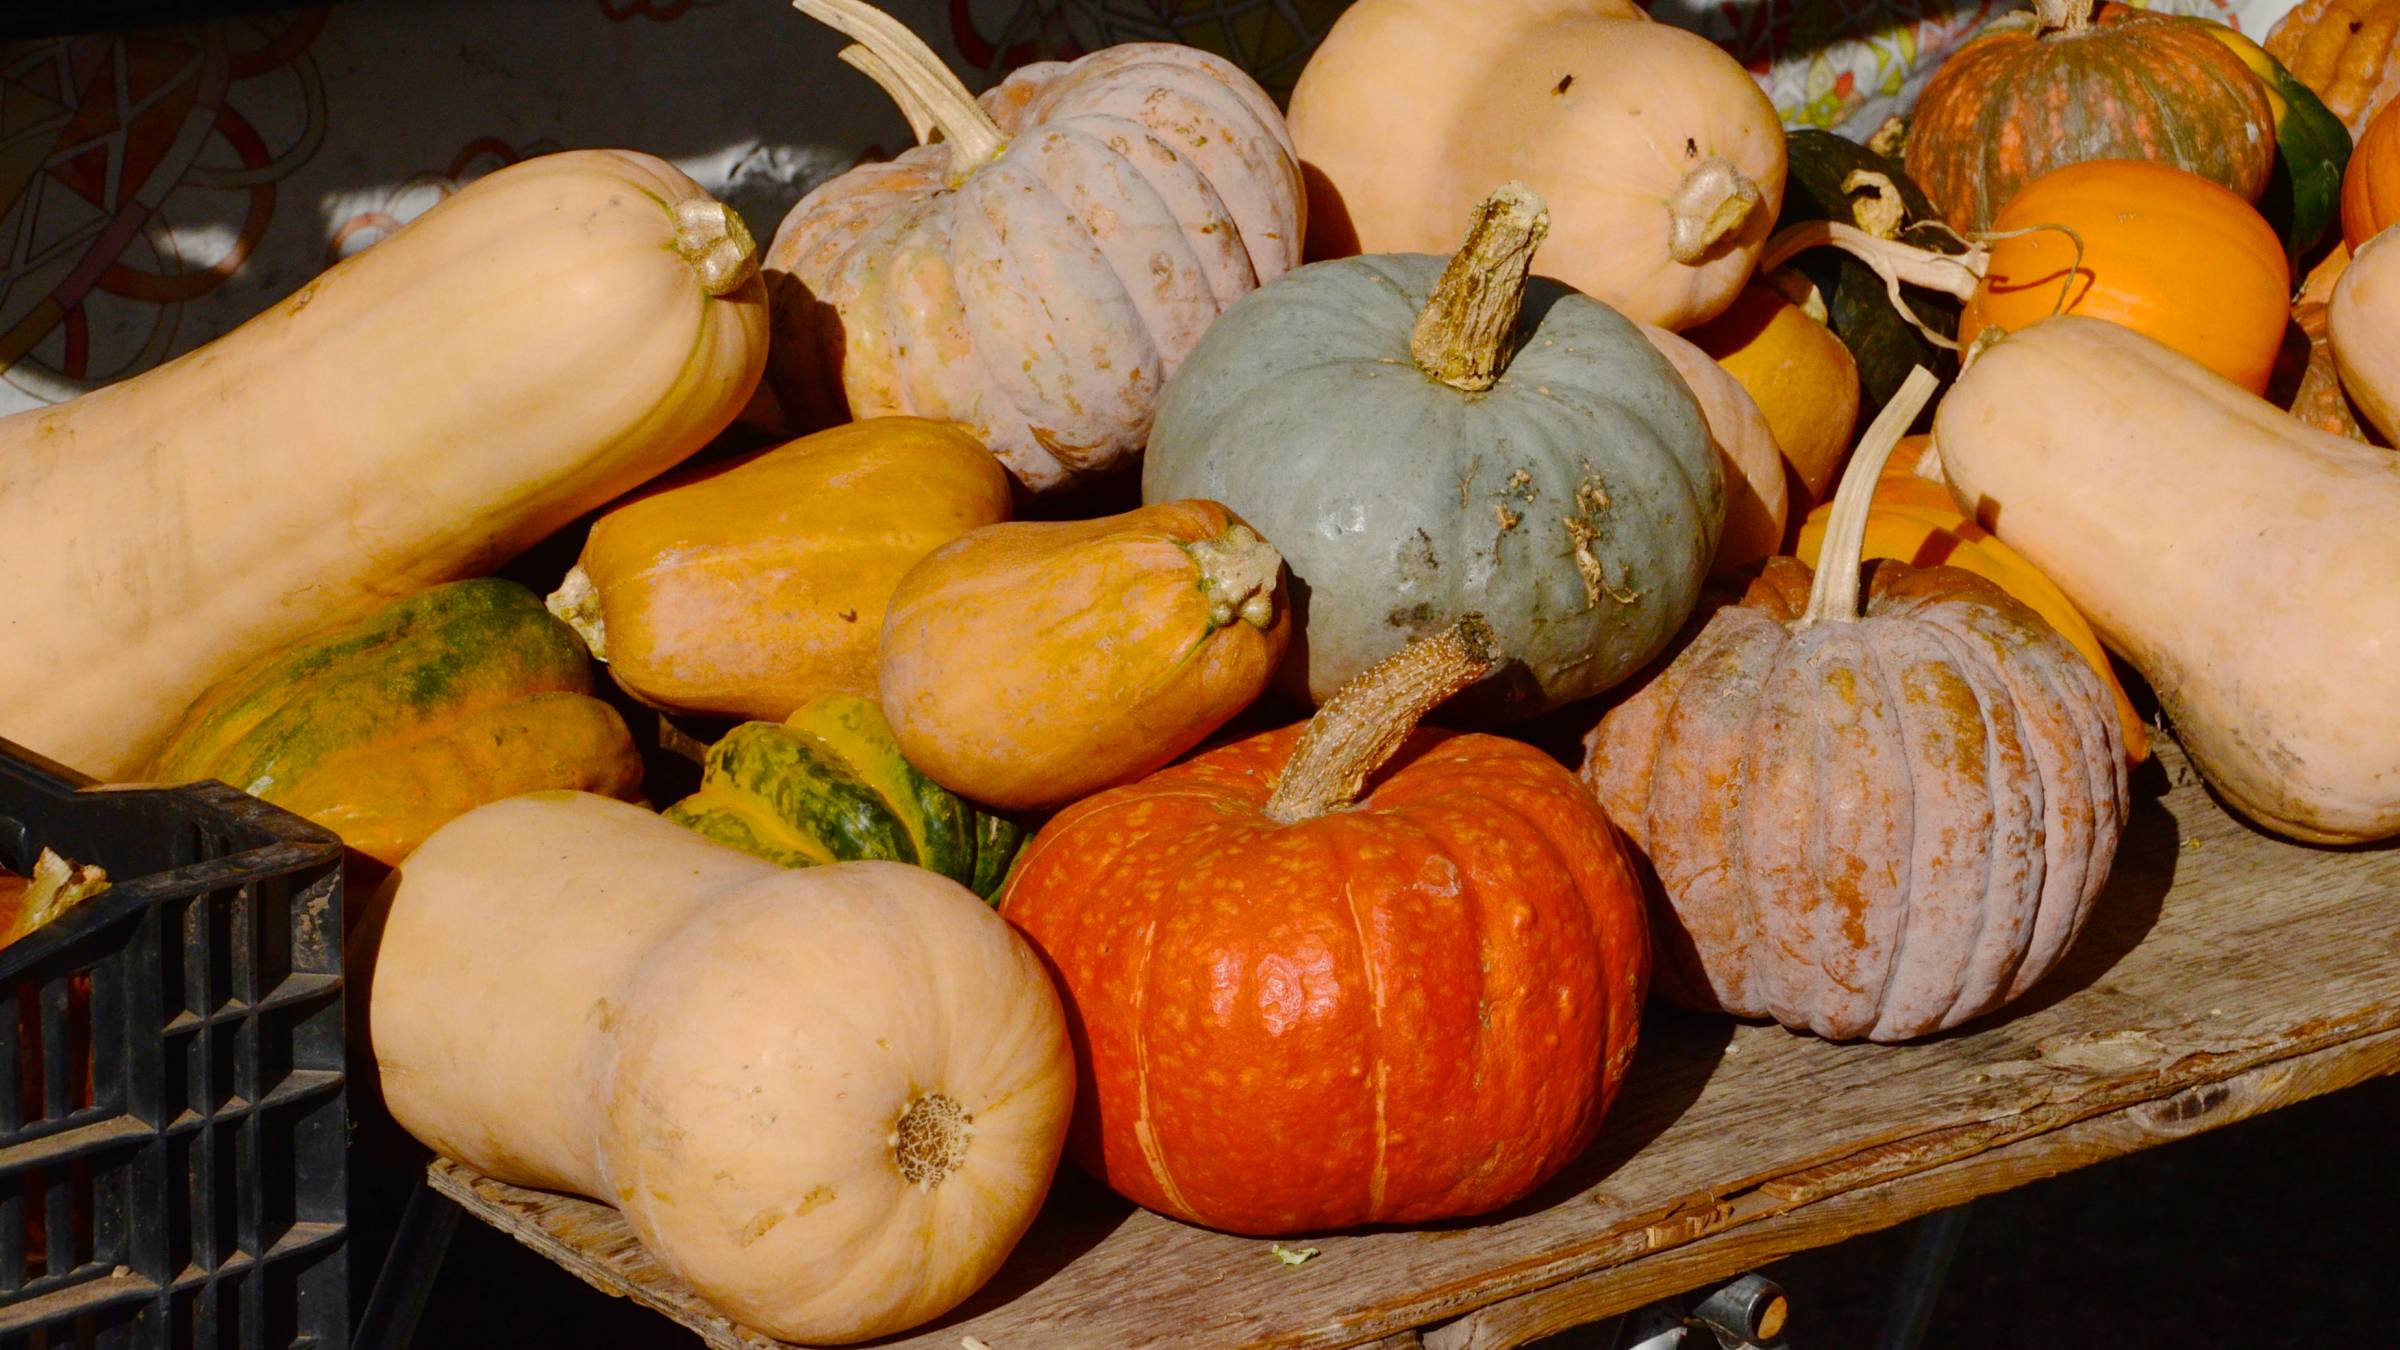 butternut squashes and pumpkins in a market